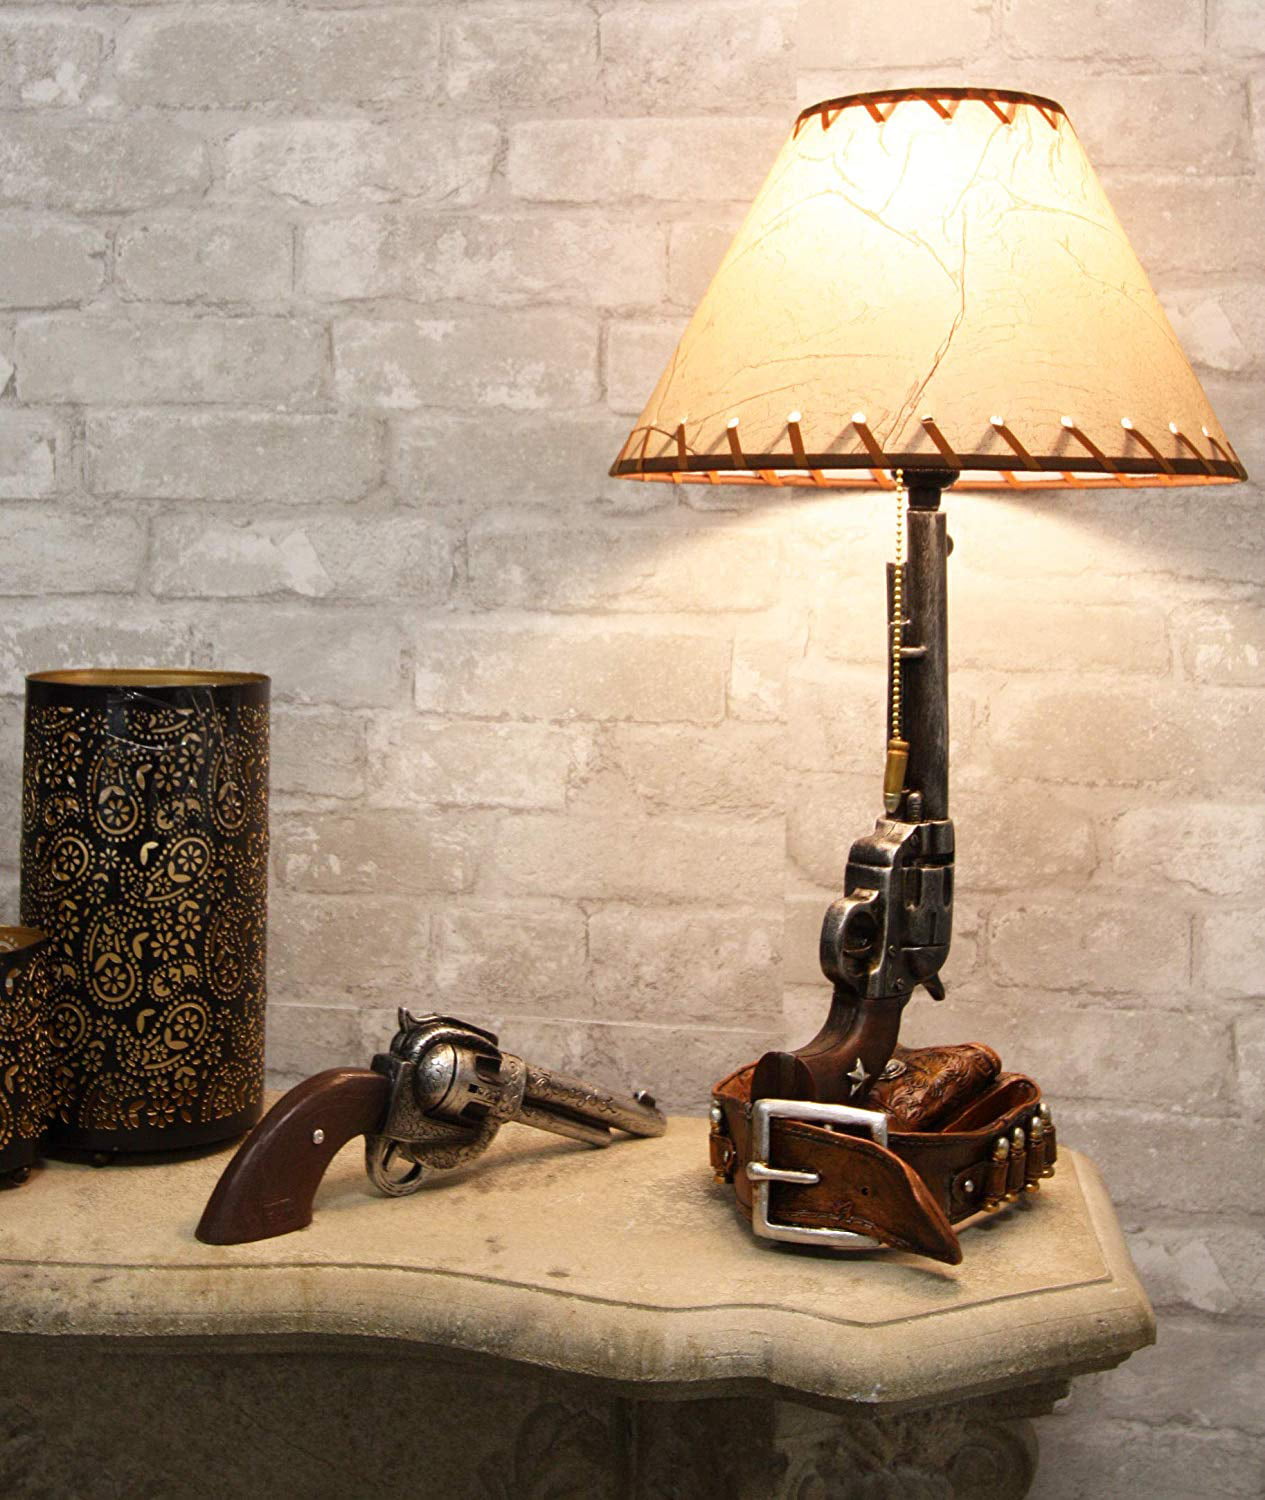 Stand Glass Table Lamp Antique Standing Decorative Lighting Rust Look Bedside Table Lamp